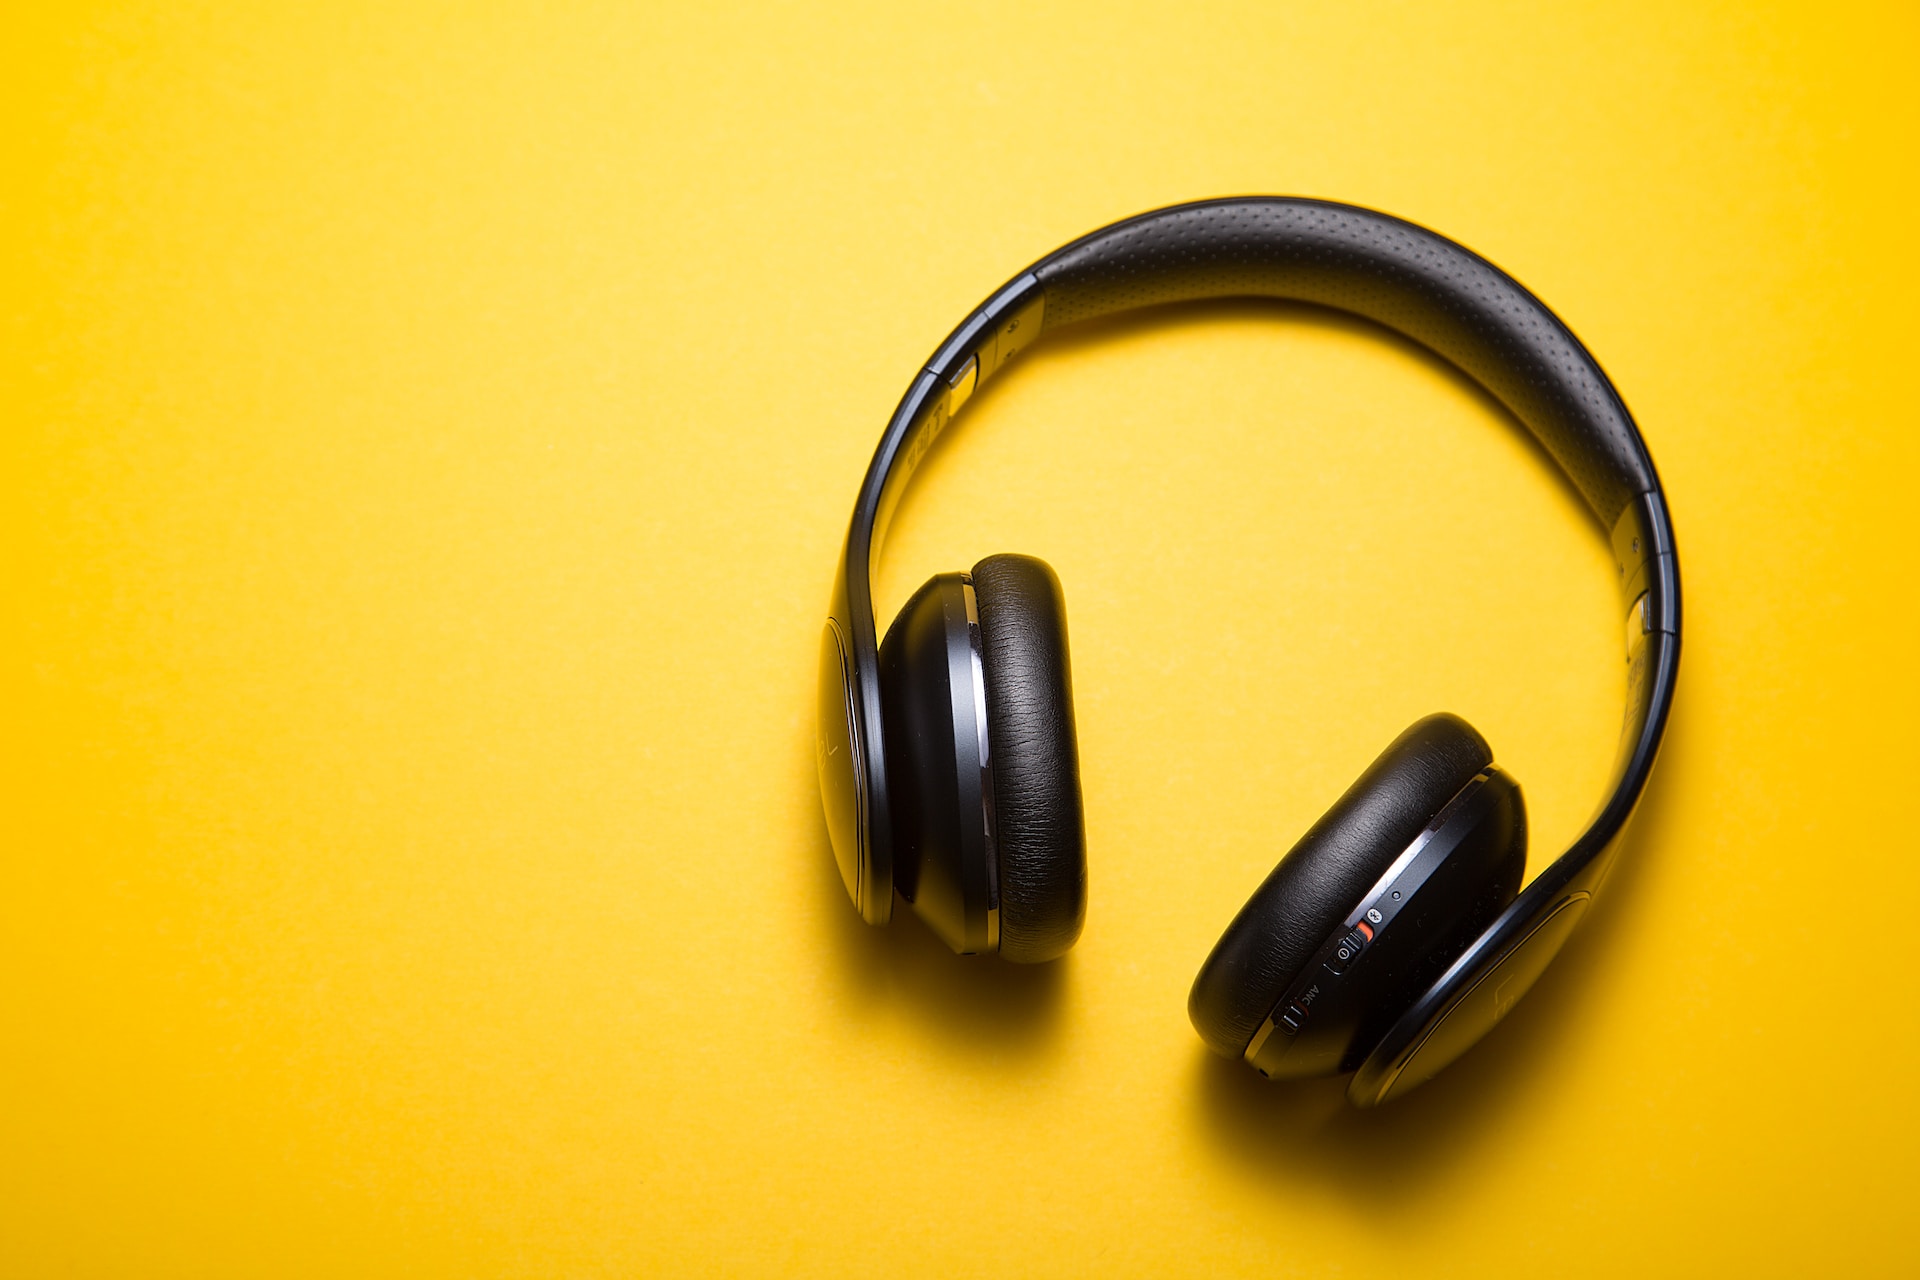 A black headphone on a yellow background